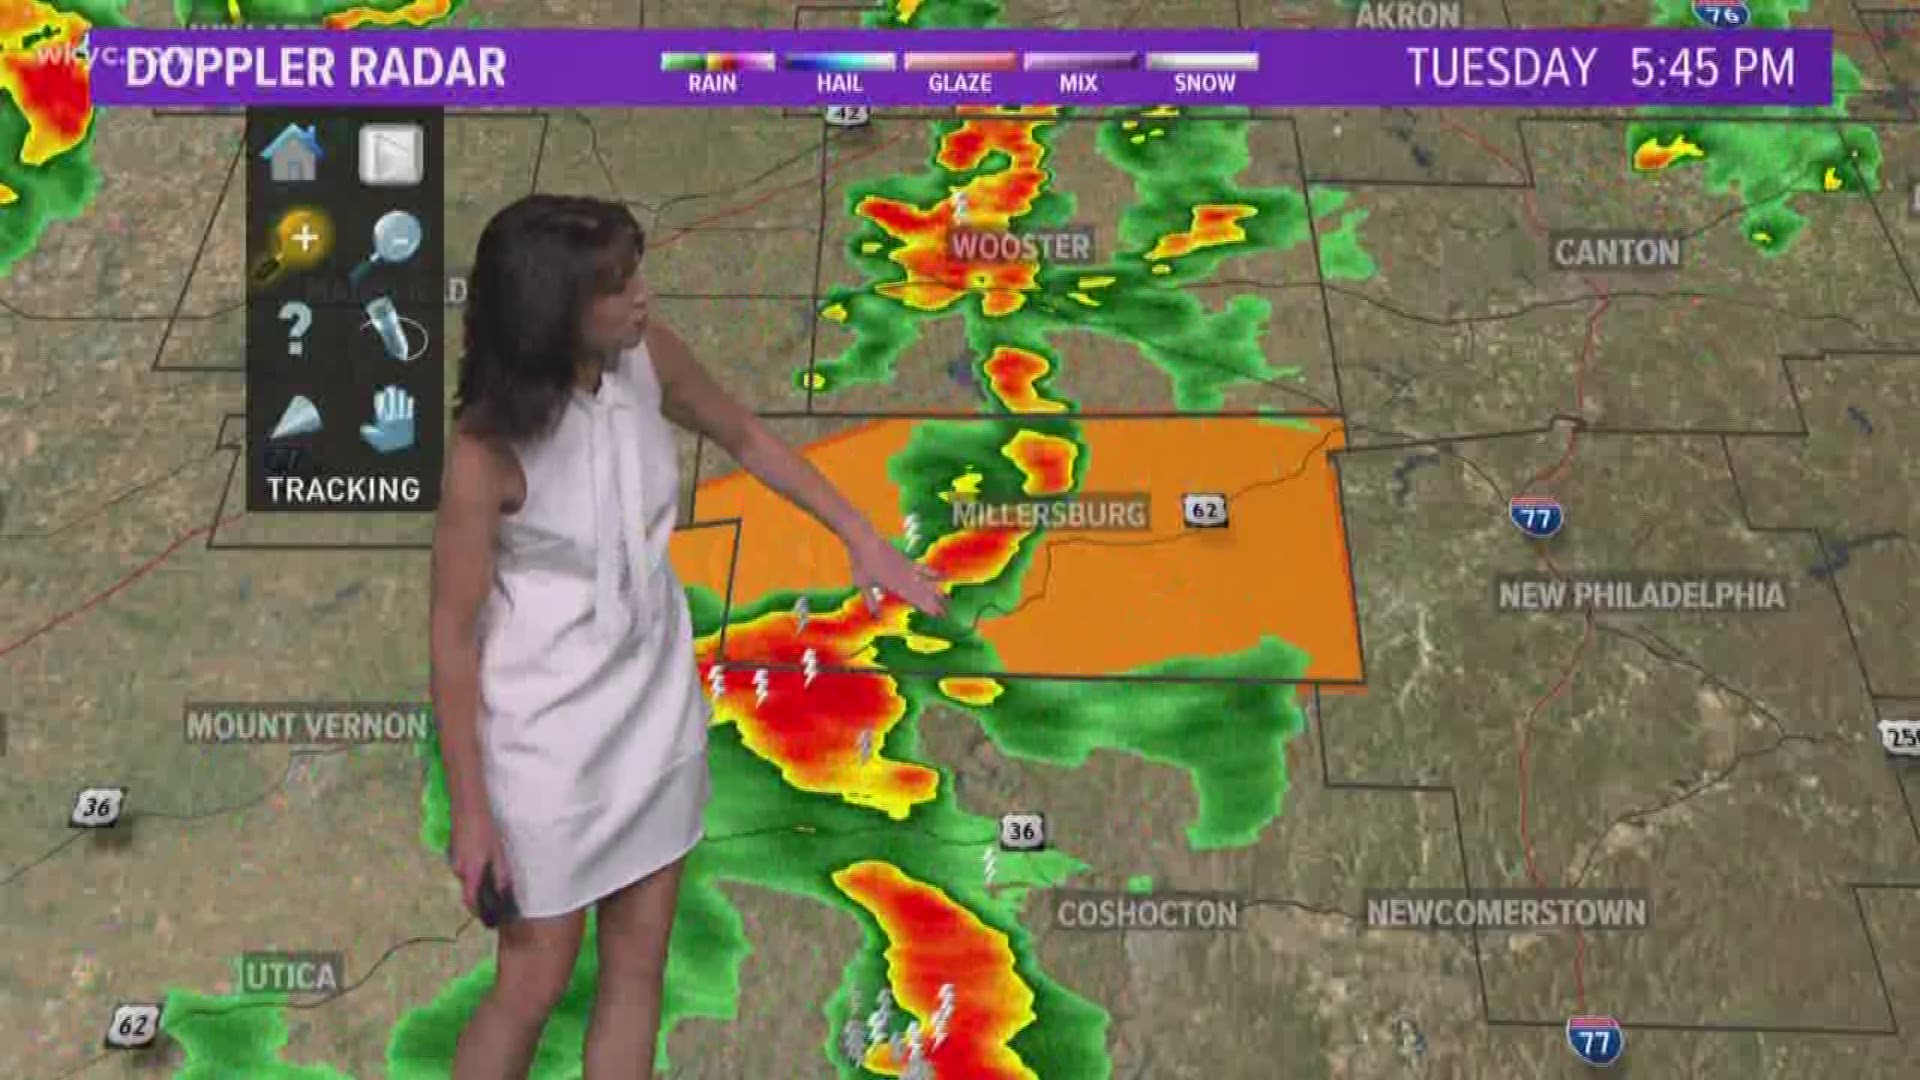 Much of Northeast Ohio was under a Severe Thunderstorm Warning on Tuesday afternoon. Chief Meteorologist Betsy Kling has the latest.